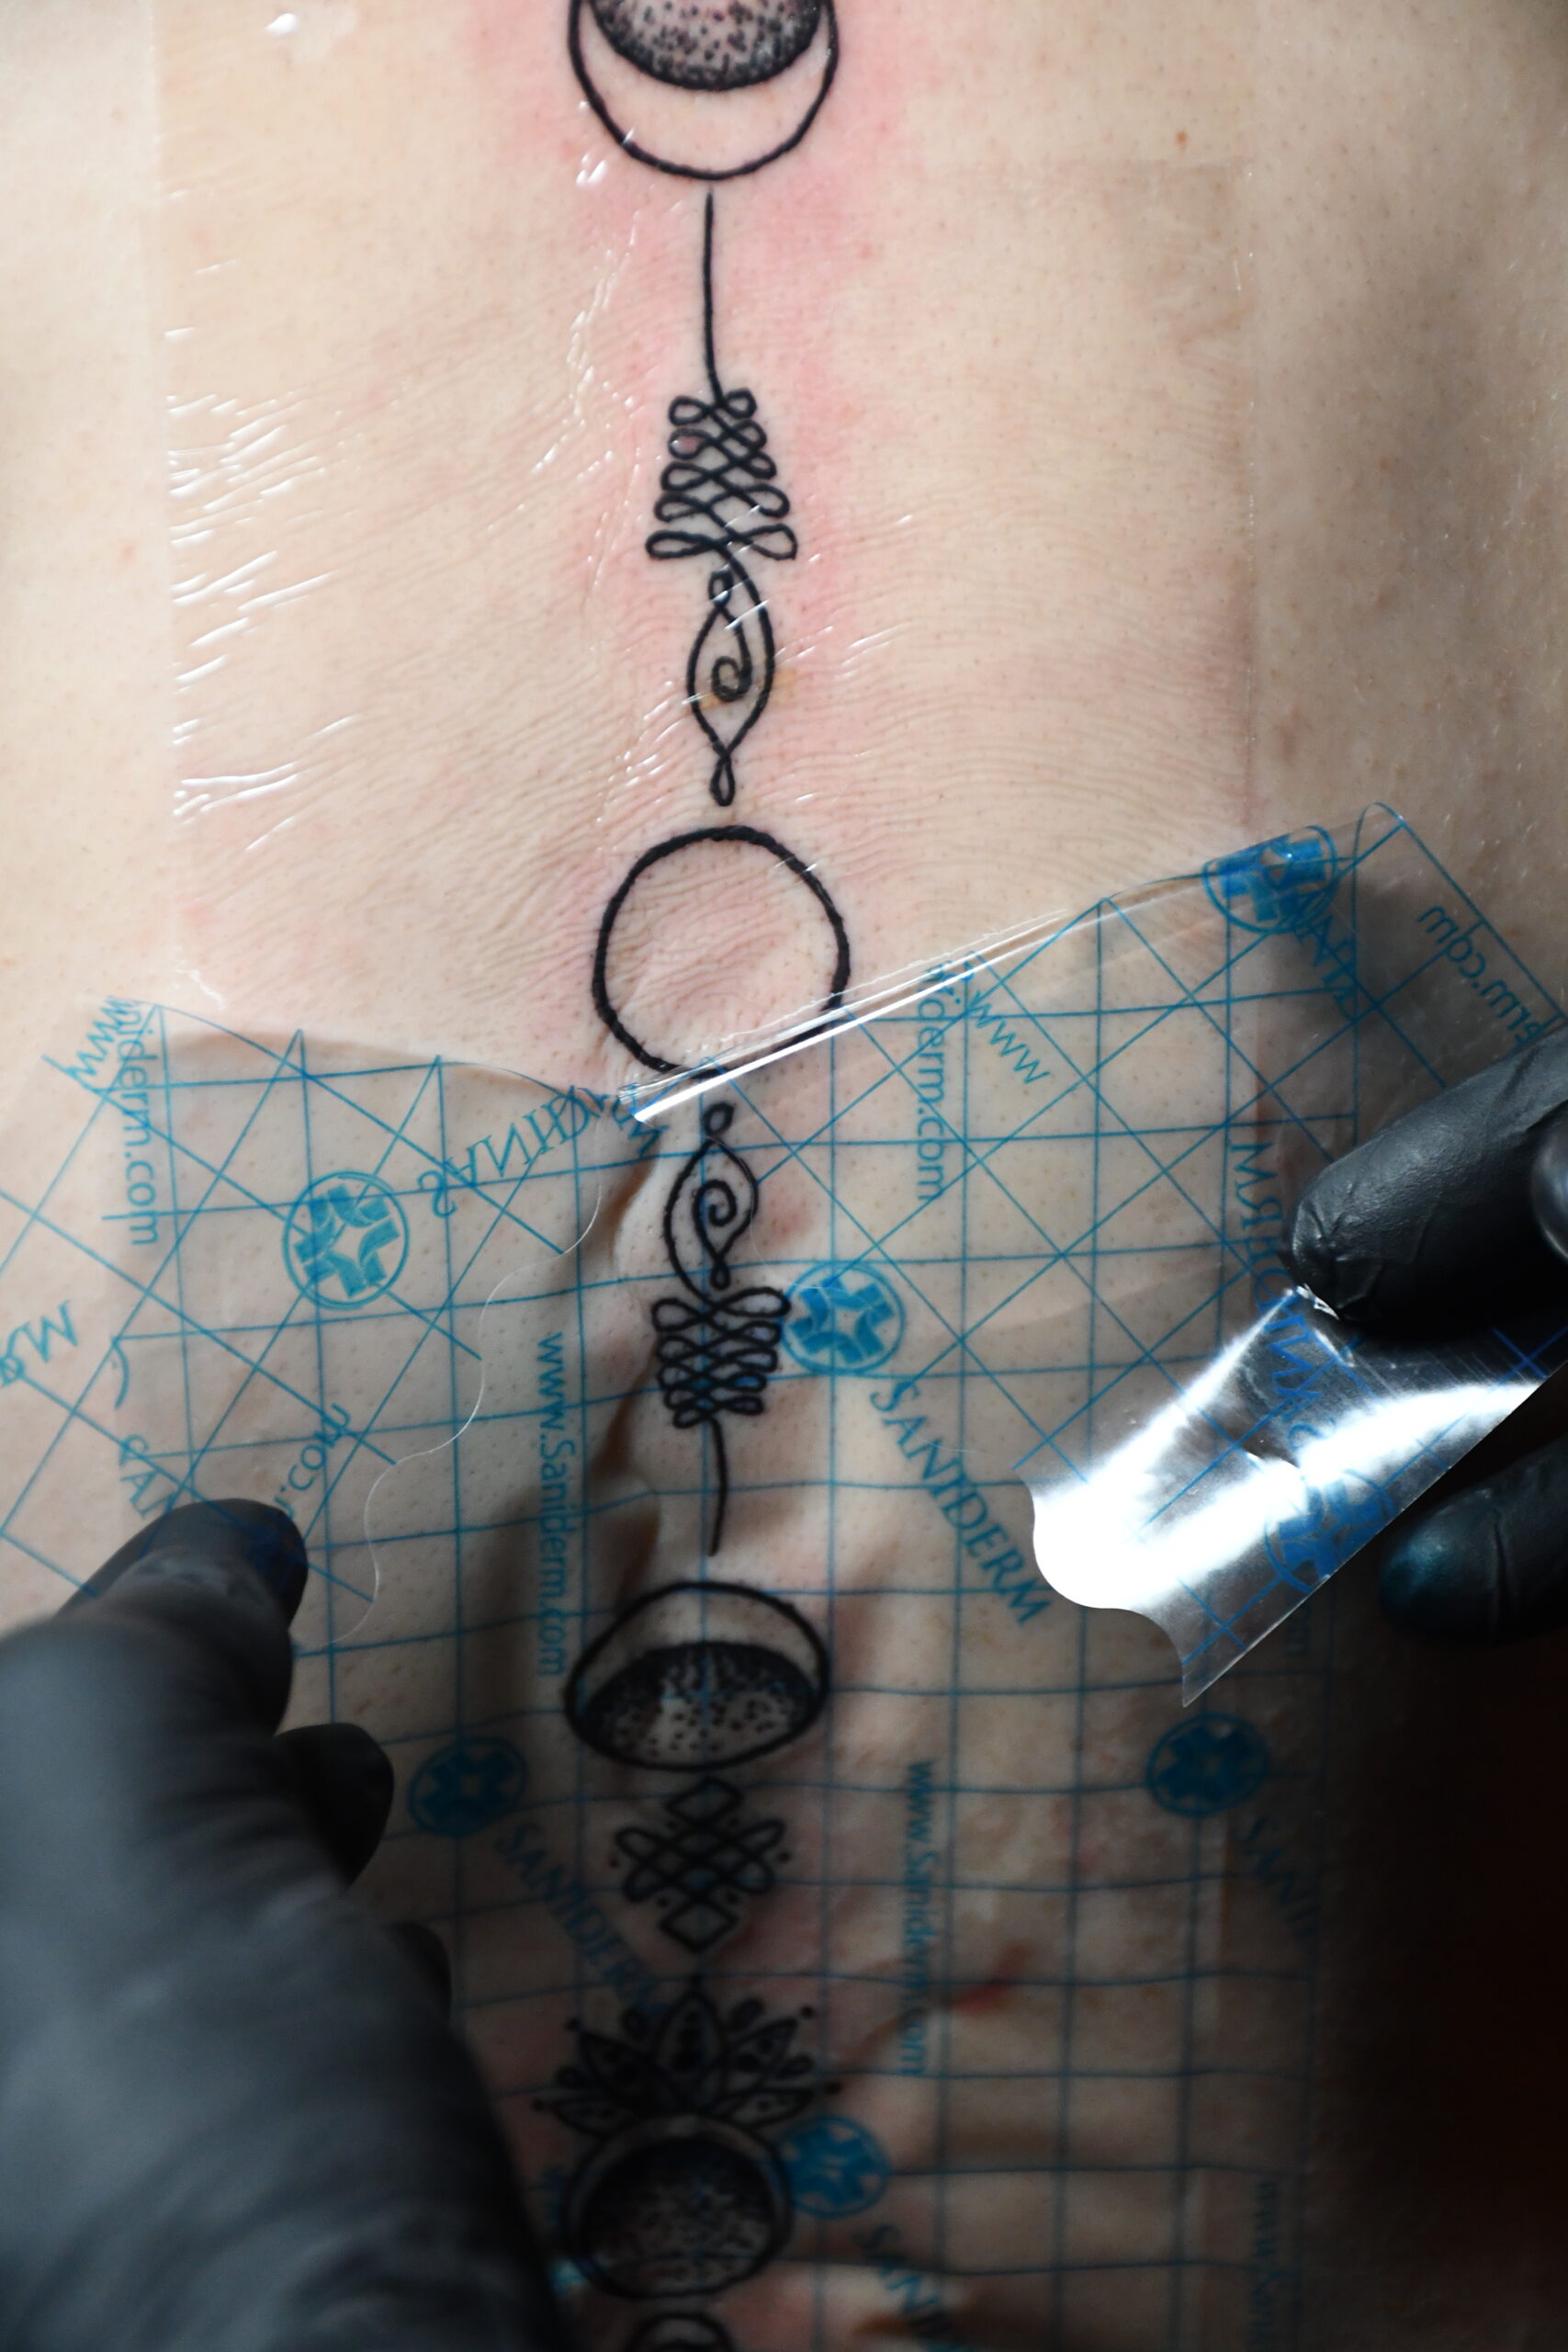 Your Guide to Tattoo Aftercare | Saniderm Knowledge Base